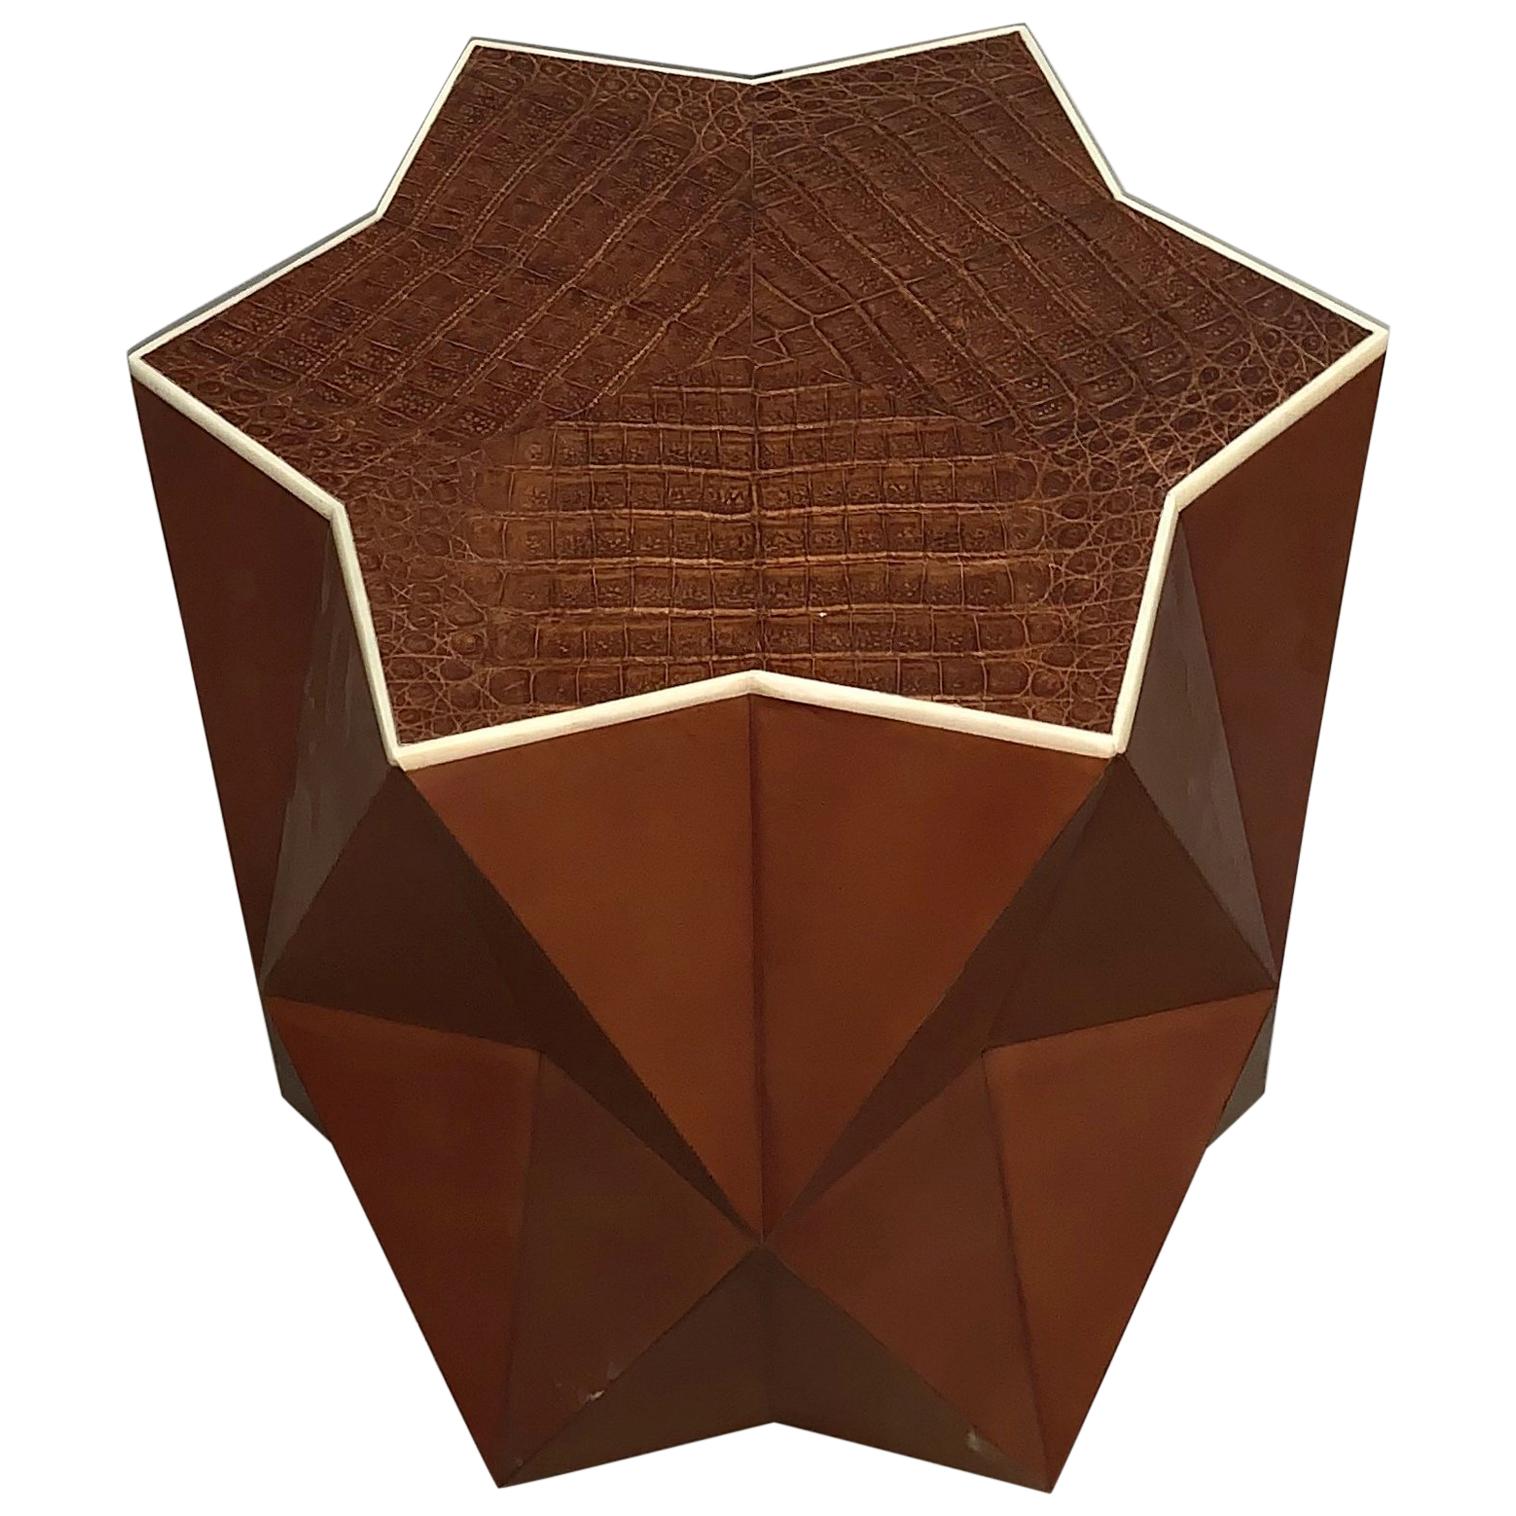 Lorin Marsh Embossed Leather Faux Goat Skin Bone Inlay Geometric Star Side Table For Sale